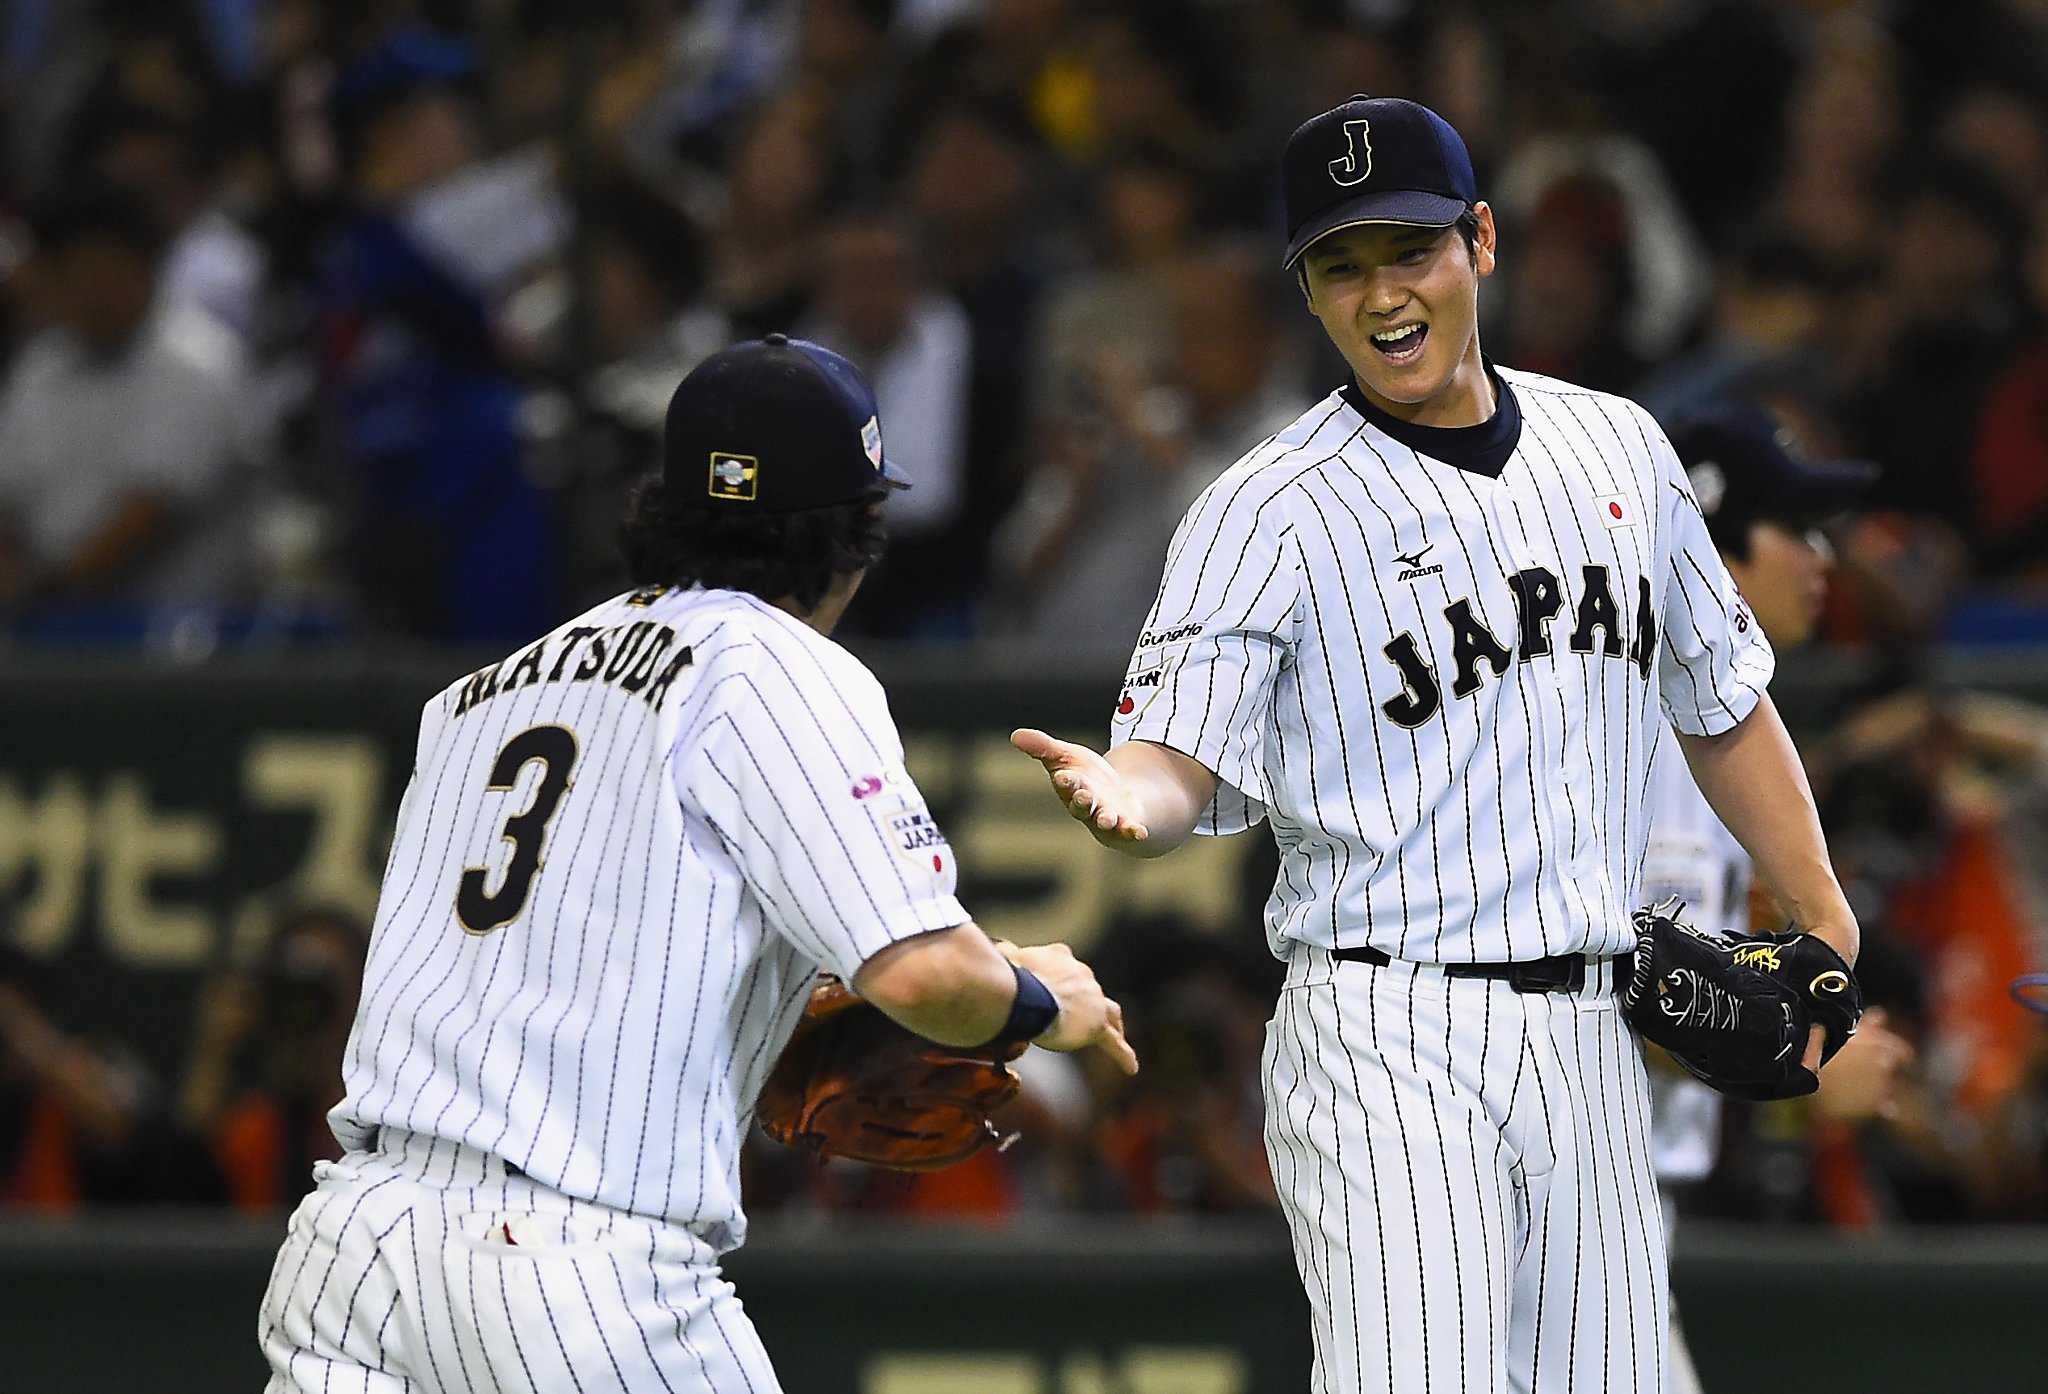 Fighters ace Shohei Otani lives up to expectations in Japan - The